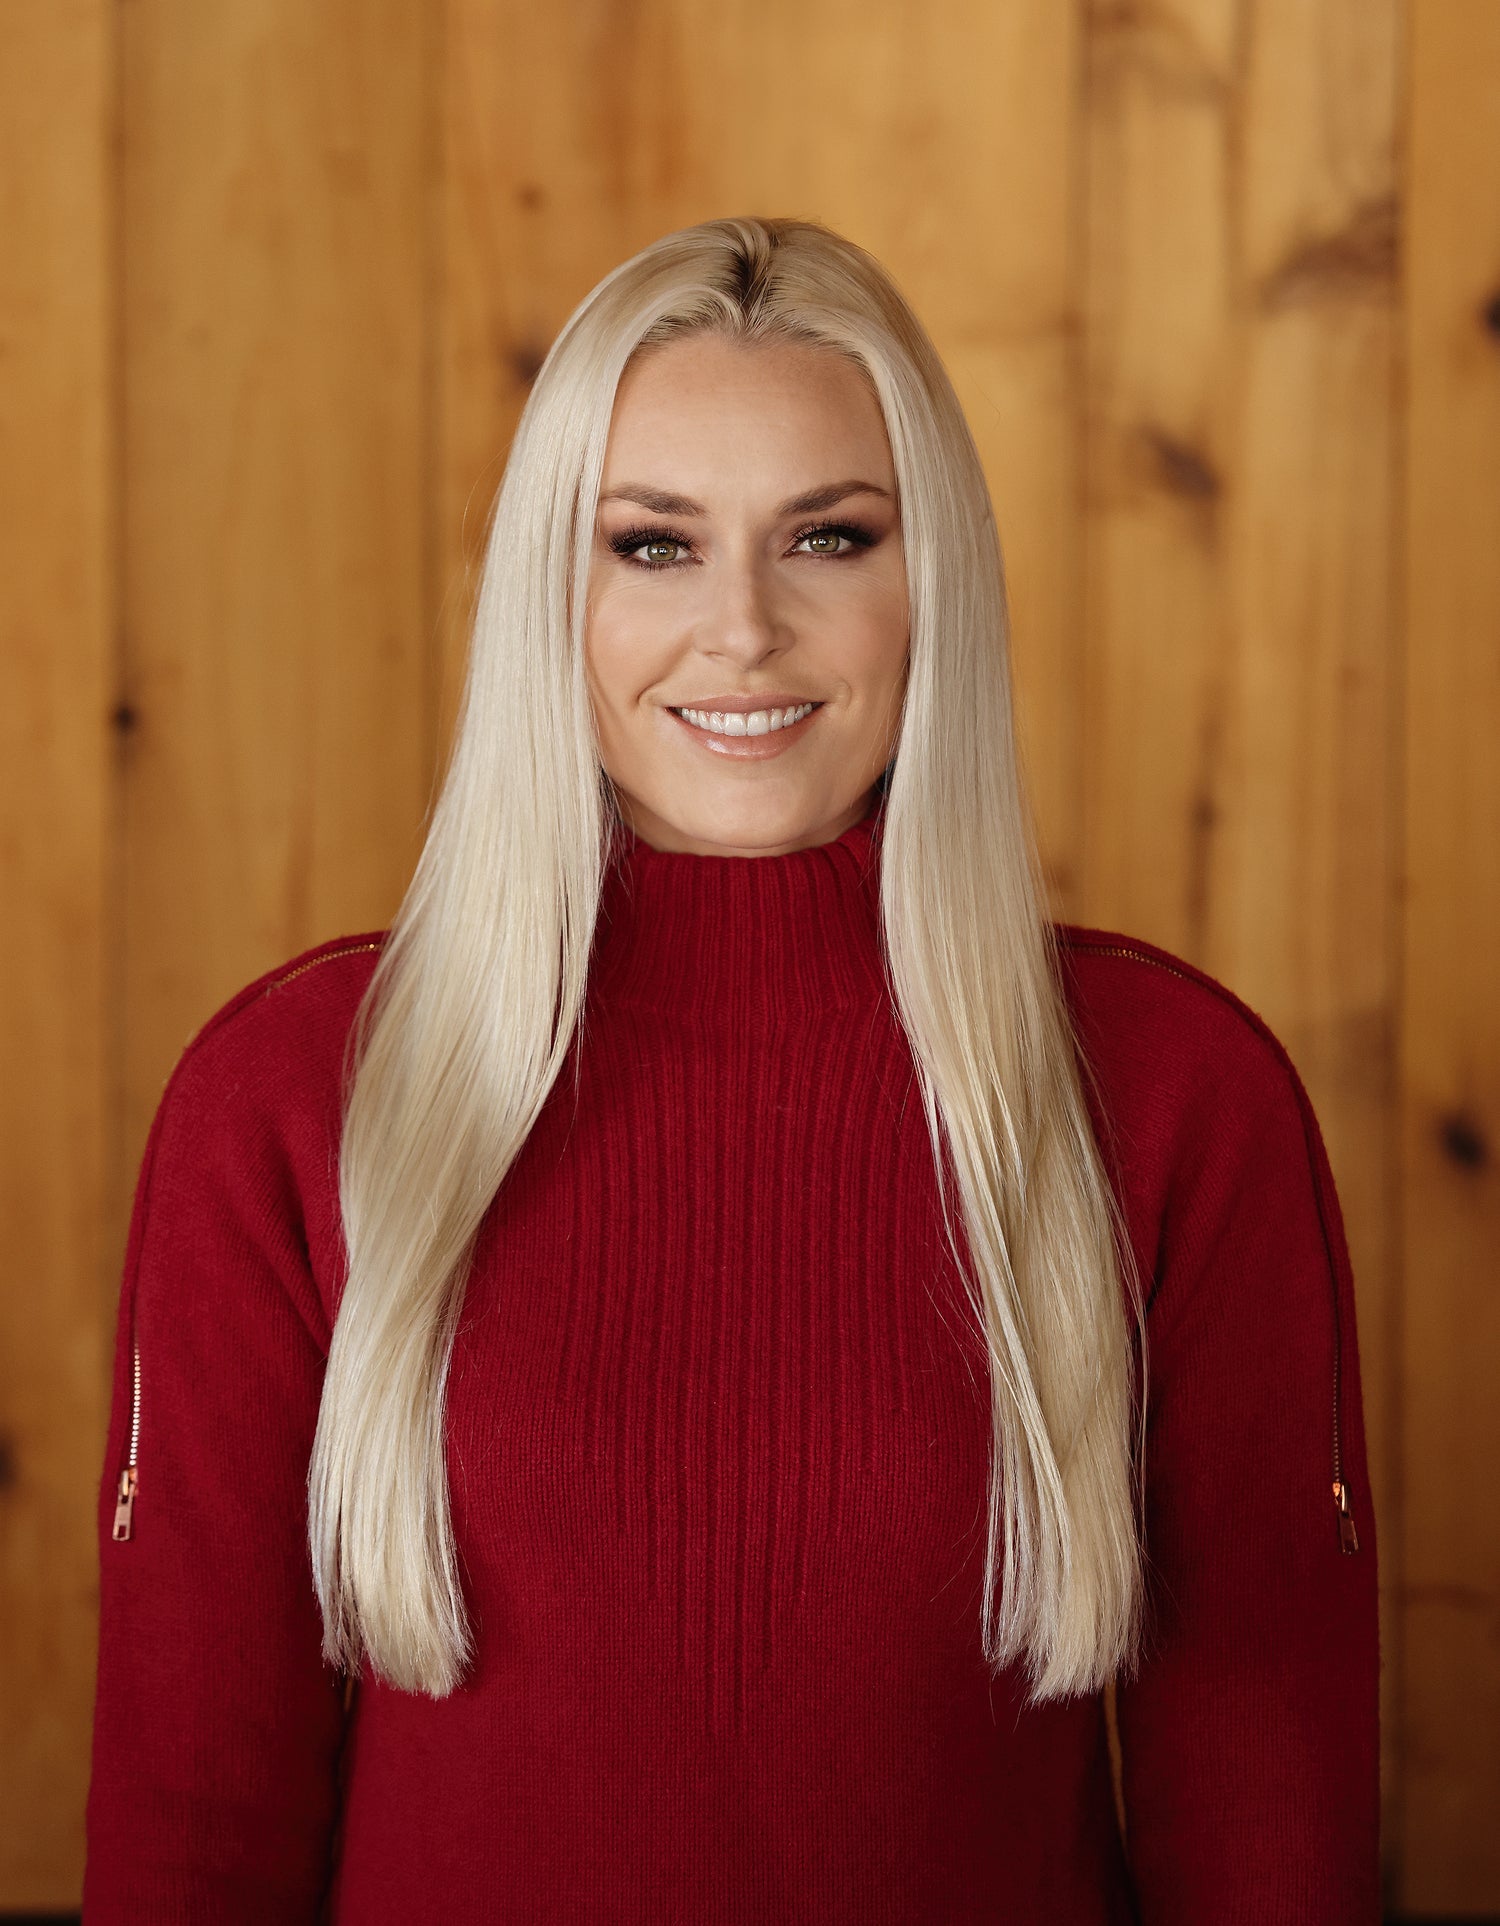 Lindsey Vonn on Finding Purpose in the Face of Adversity